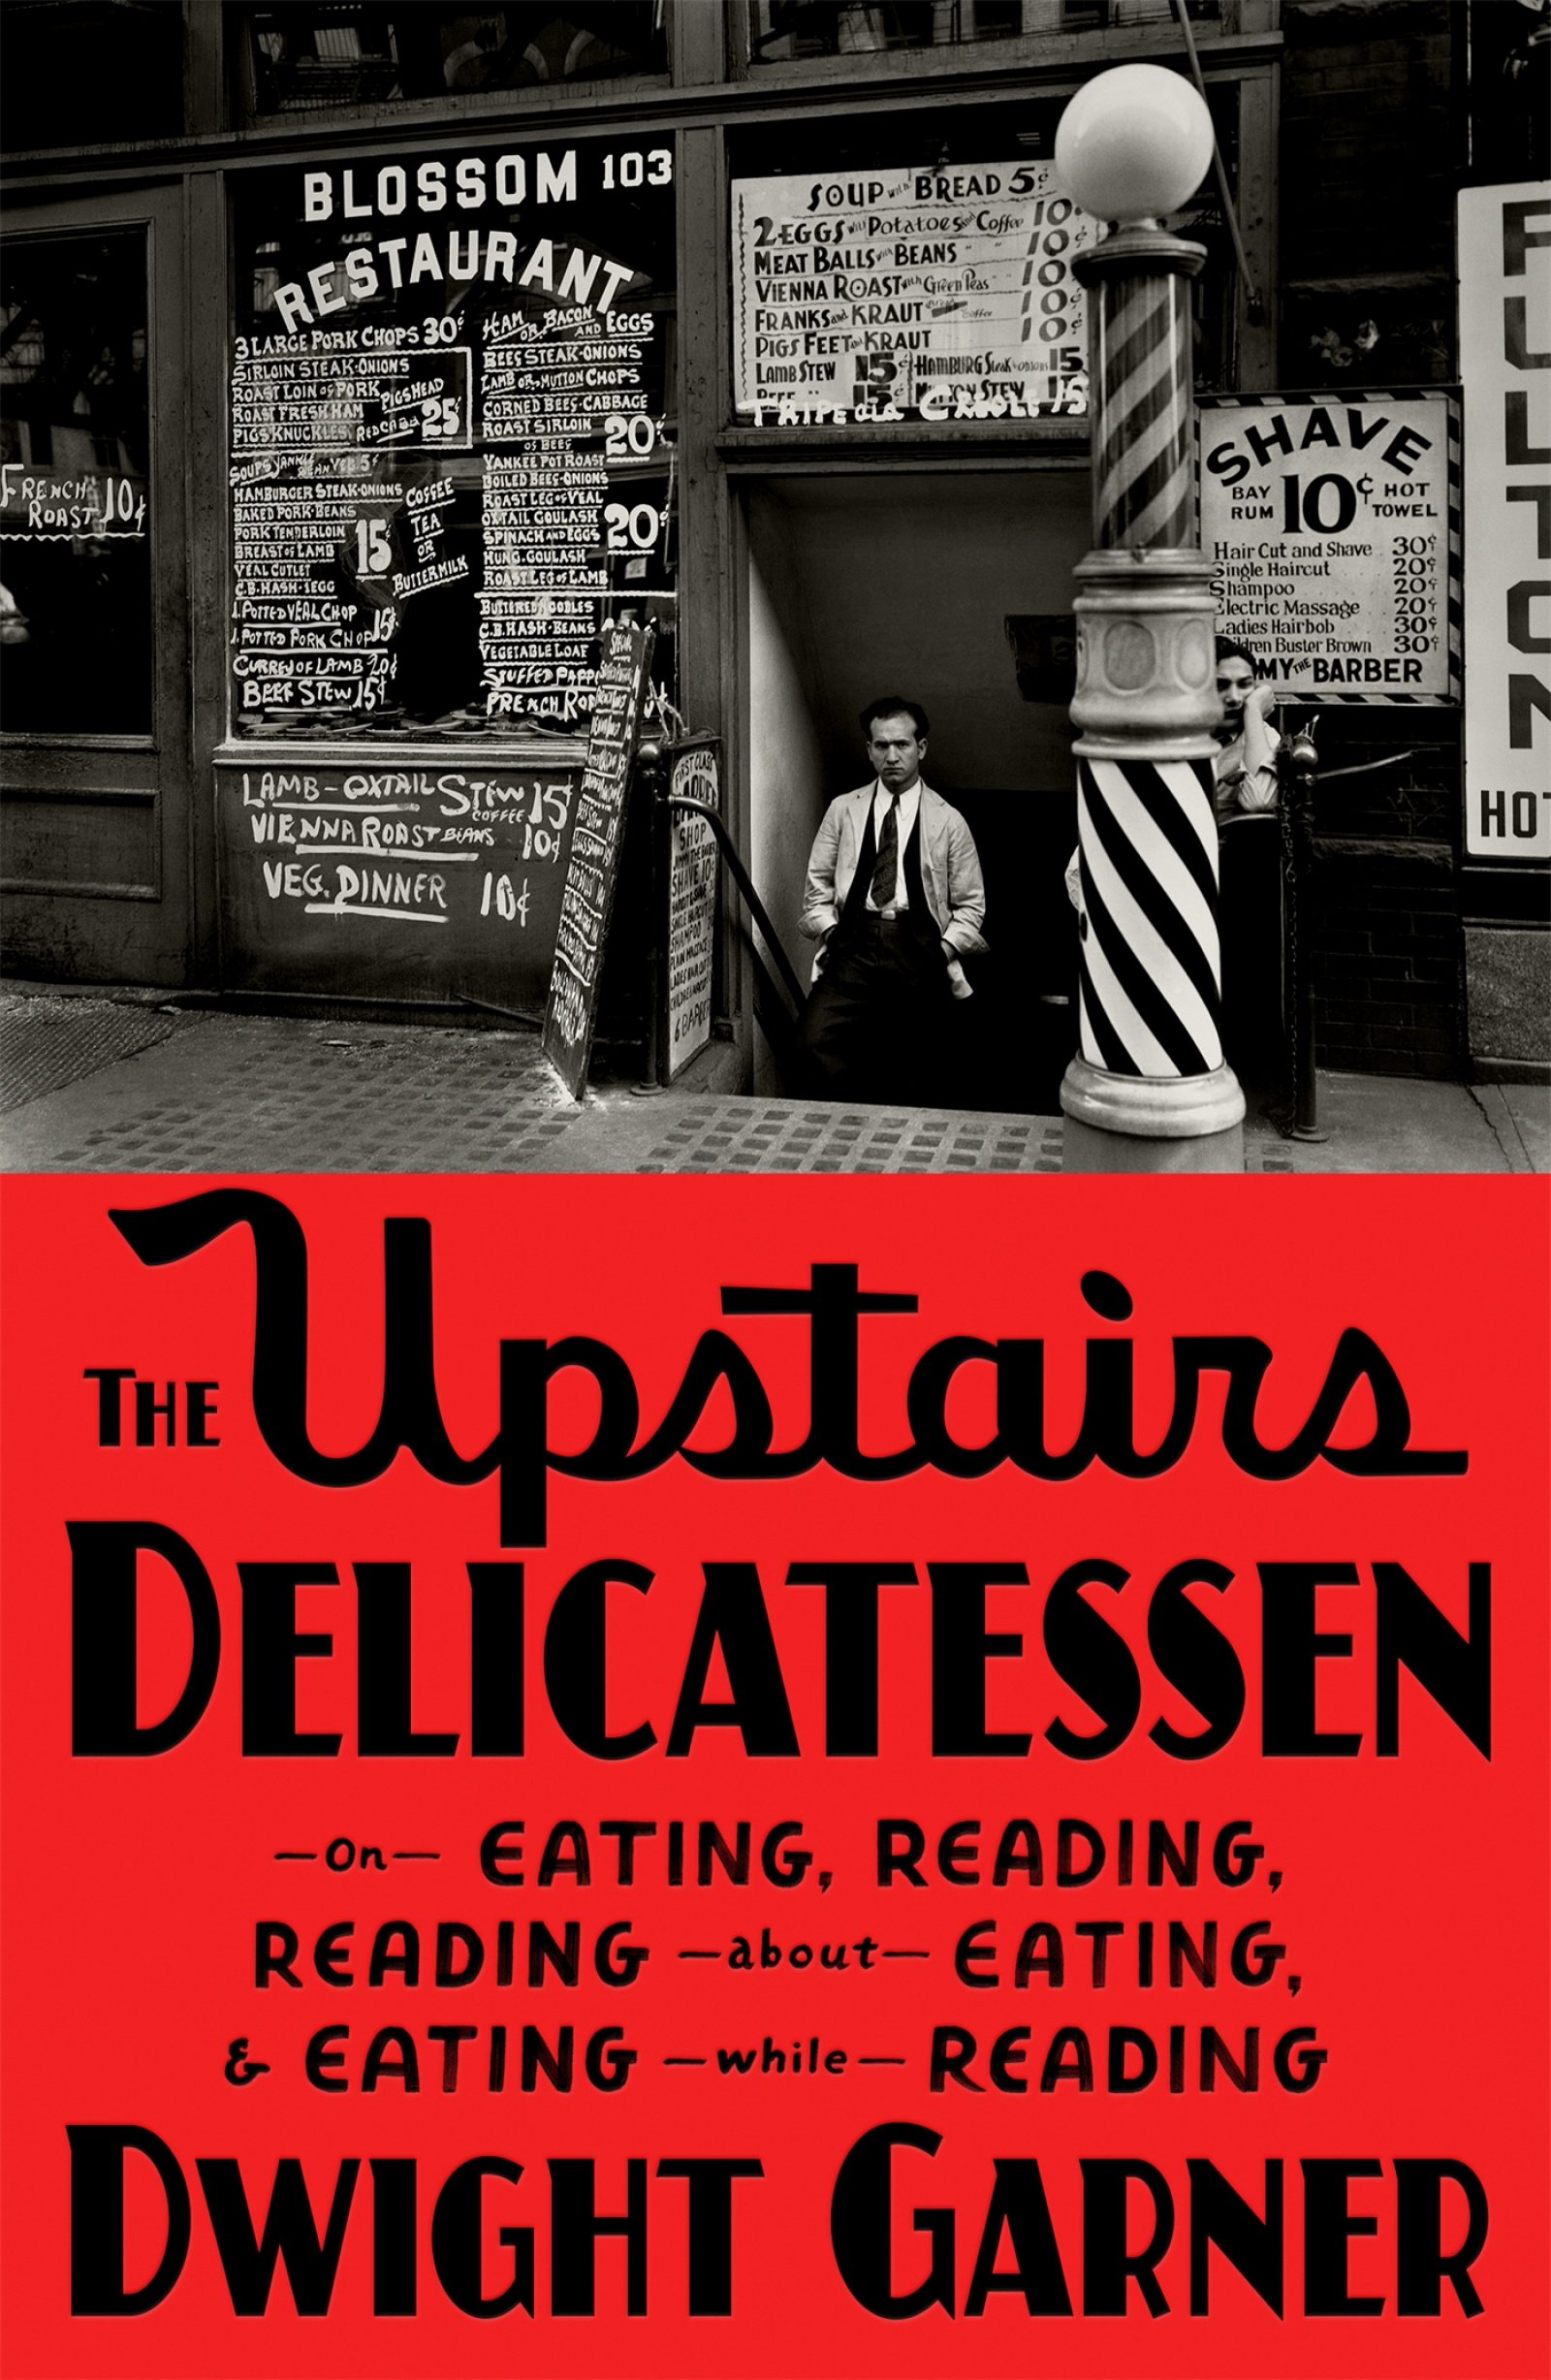 Eat, Drink, Read: Dwight Garner's Obsession with Word and Table